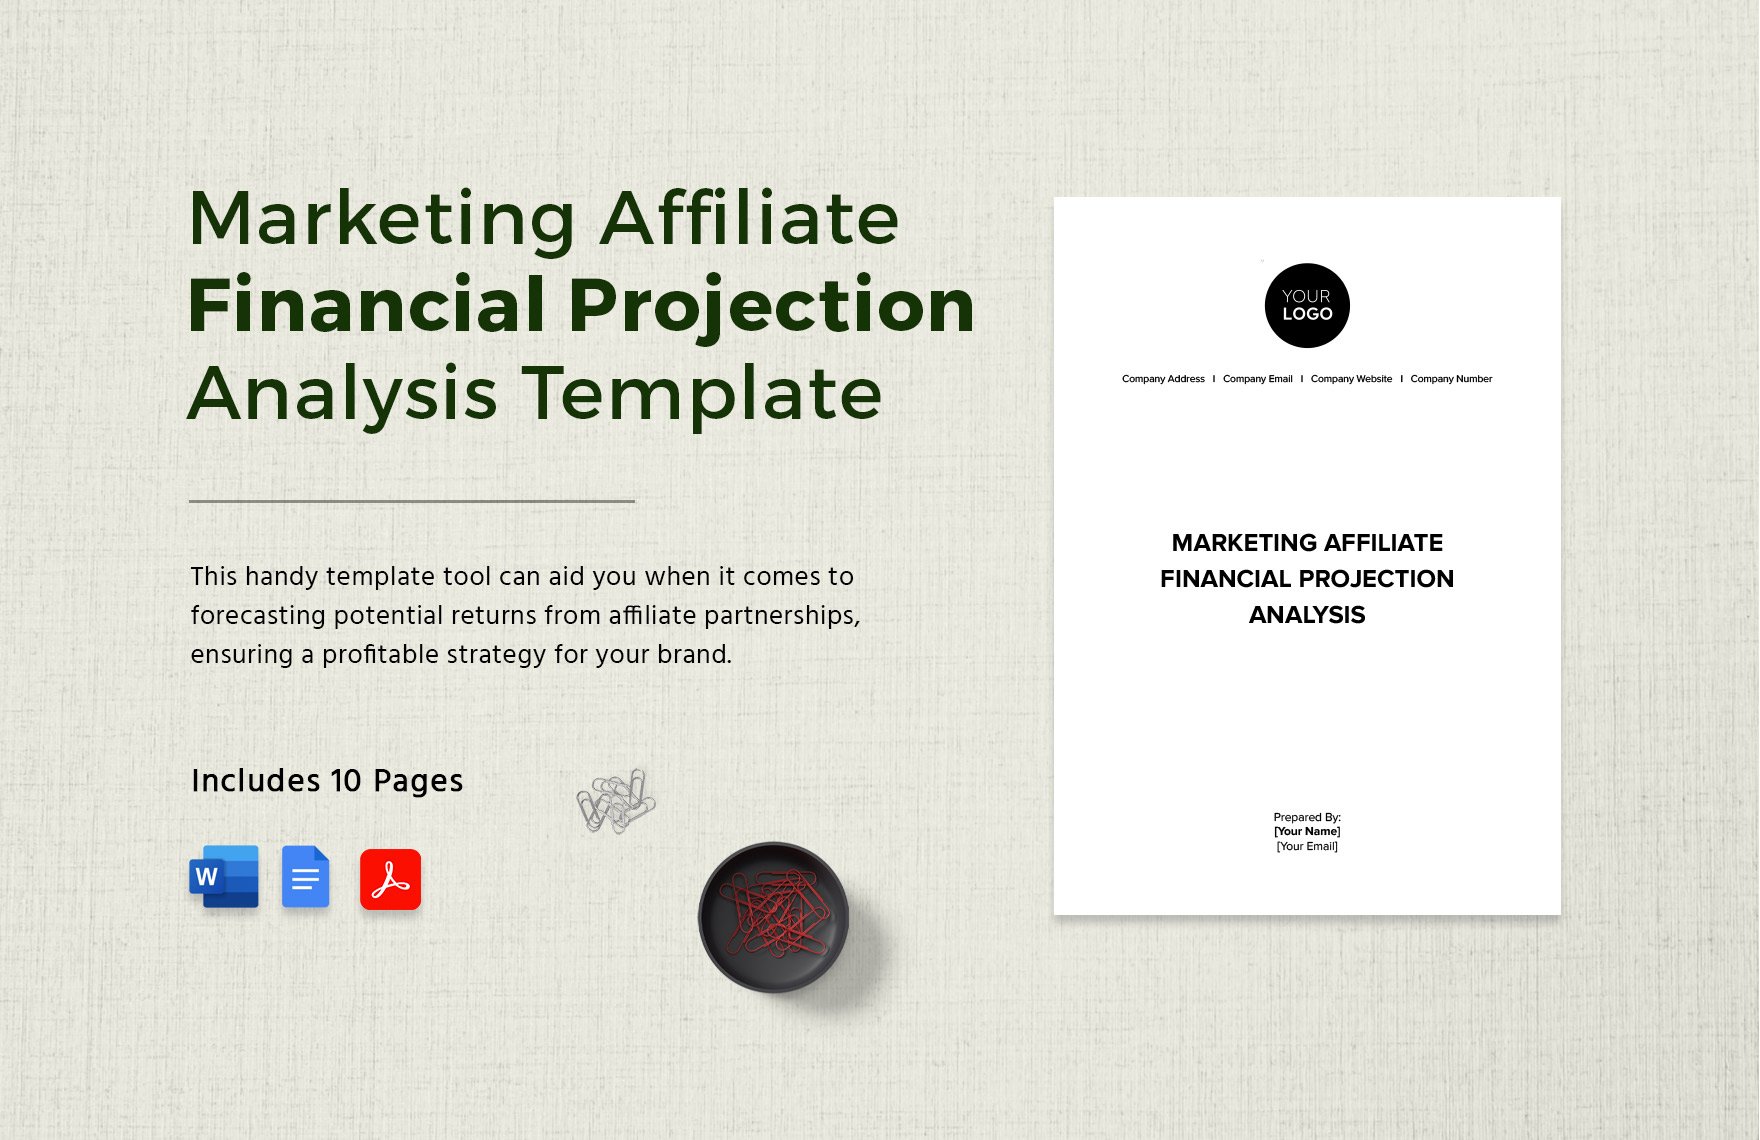 Marketing Affiliate Financial Projection Analysis Template